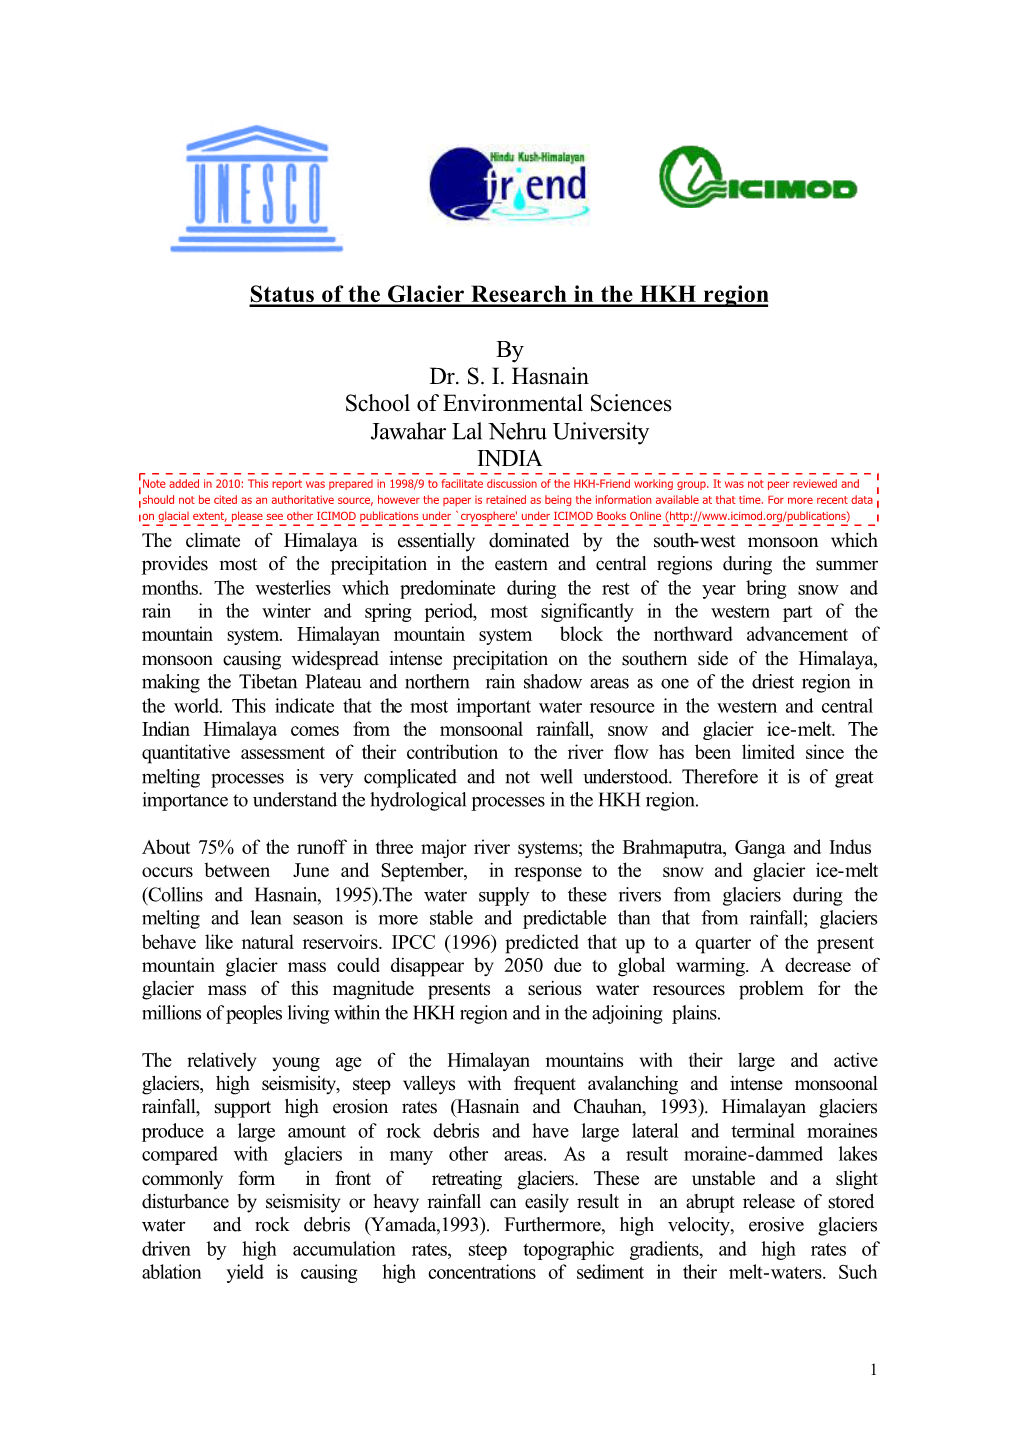 Status of the Glacier Research in the HKH Region by Dr. S. I. Hasnain